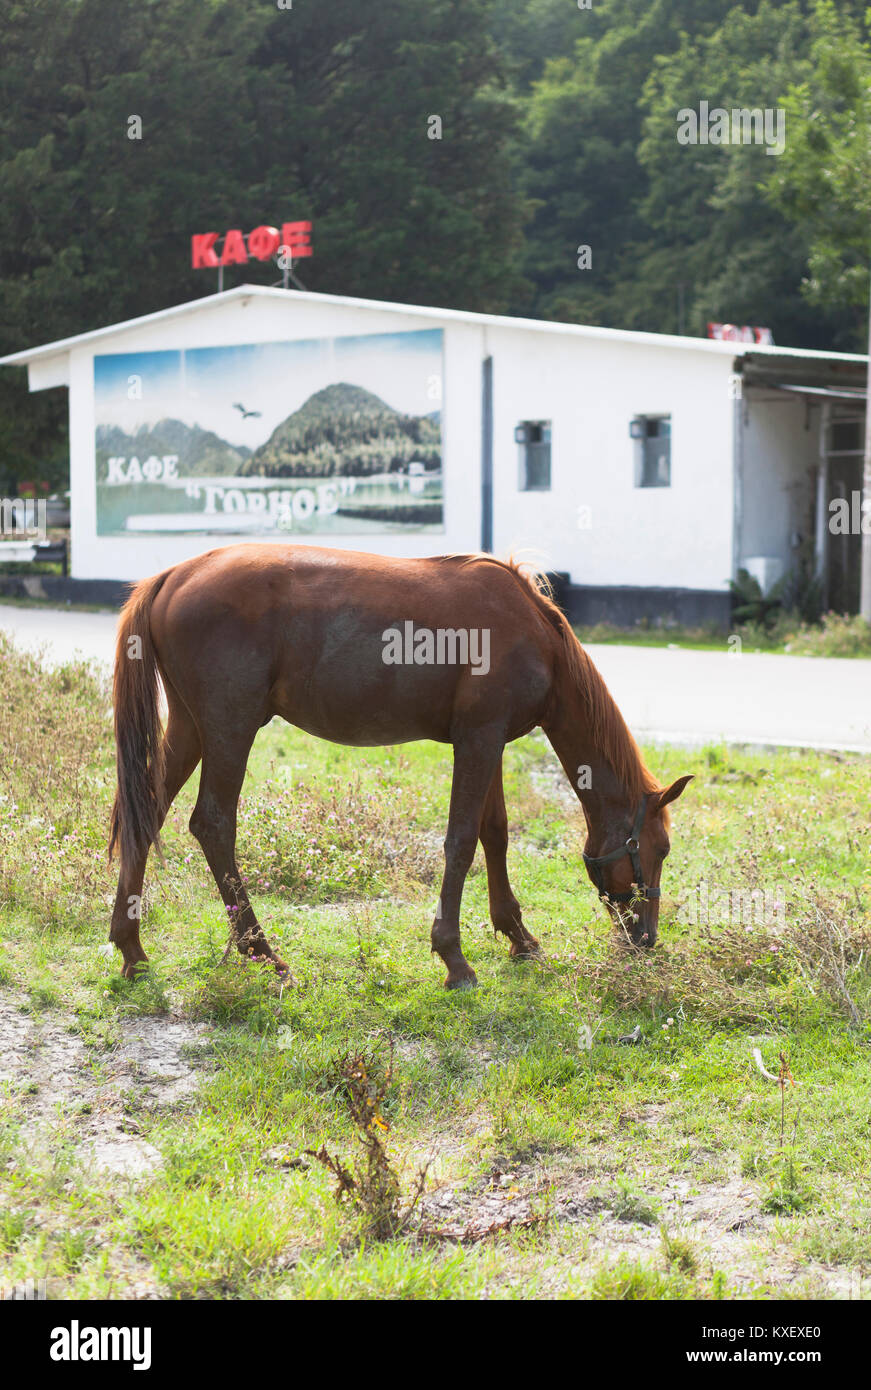 Dederkoy, Tuapse District, Krasnodar Region, Russia - July 9, 2013: A horse grazing beside the road on the background of coffee Stock Photo